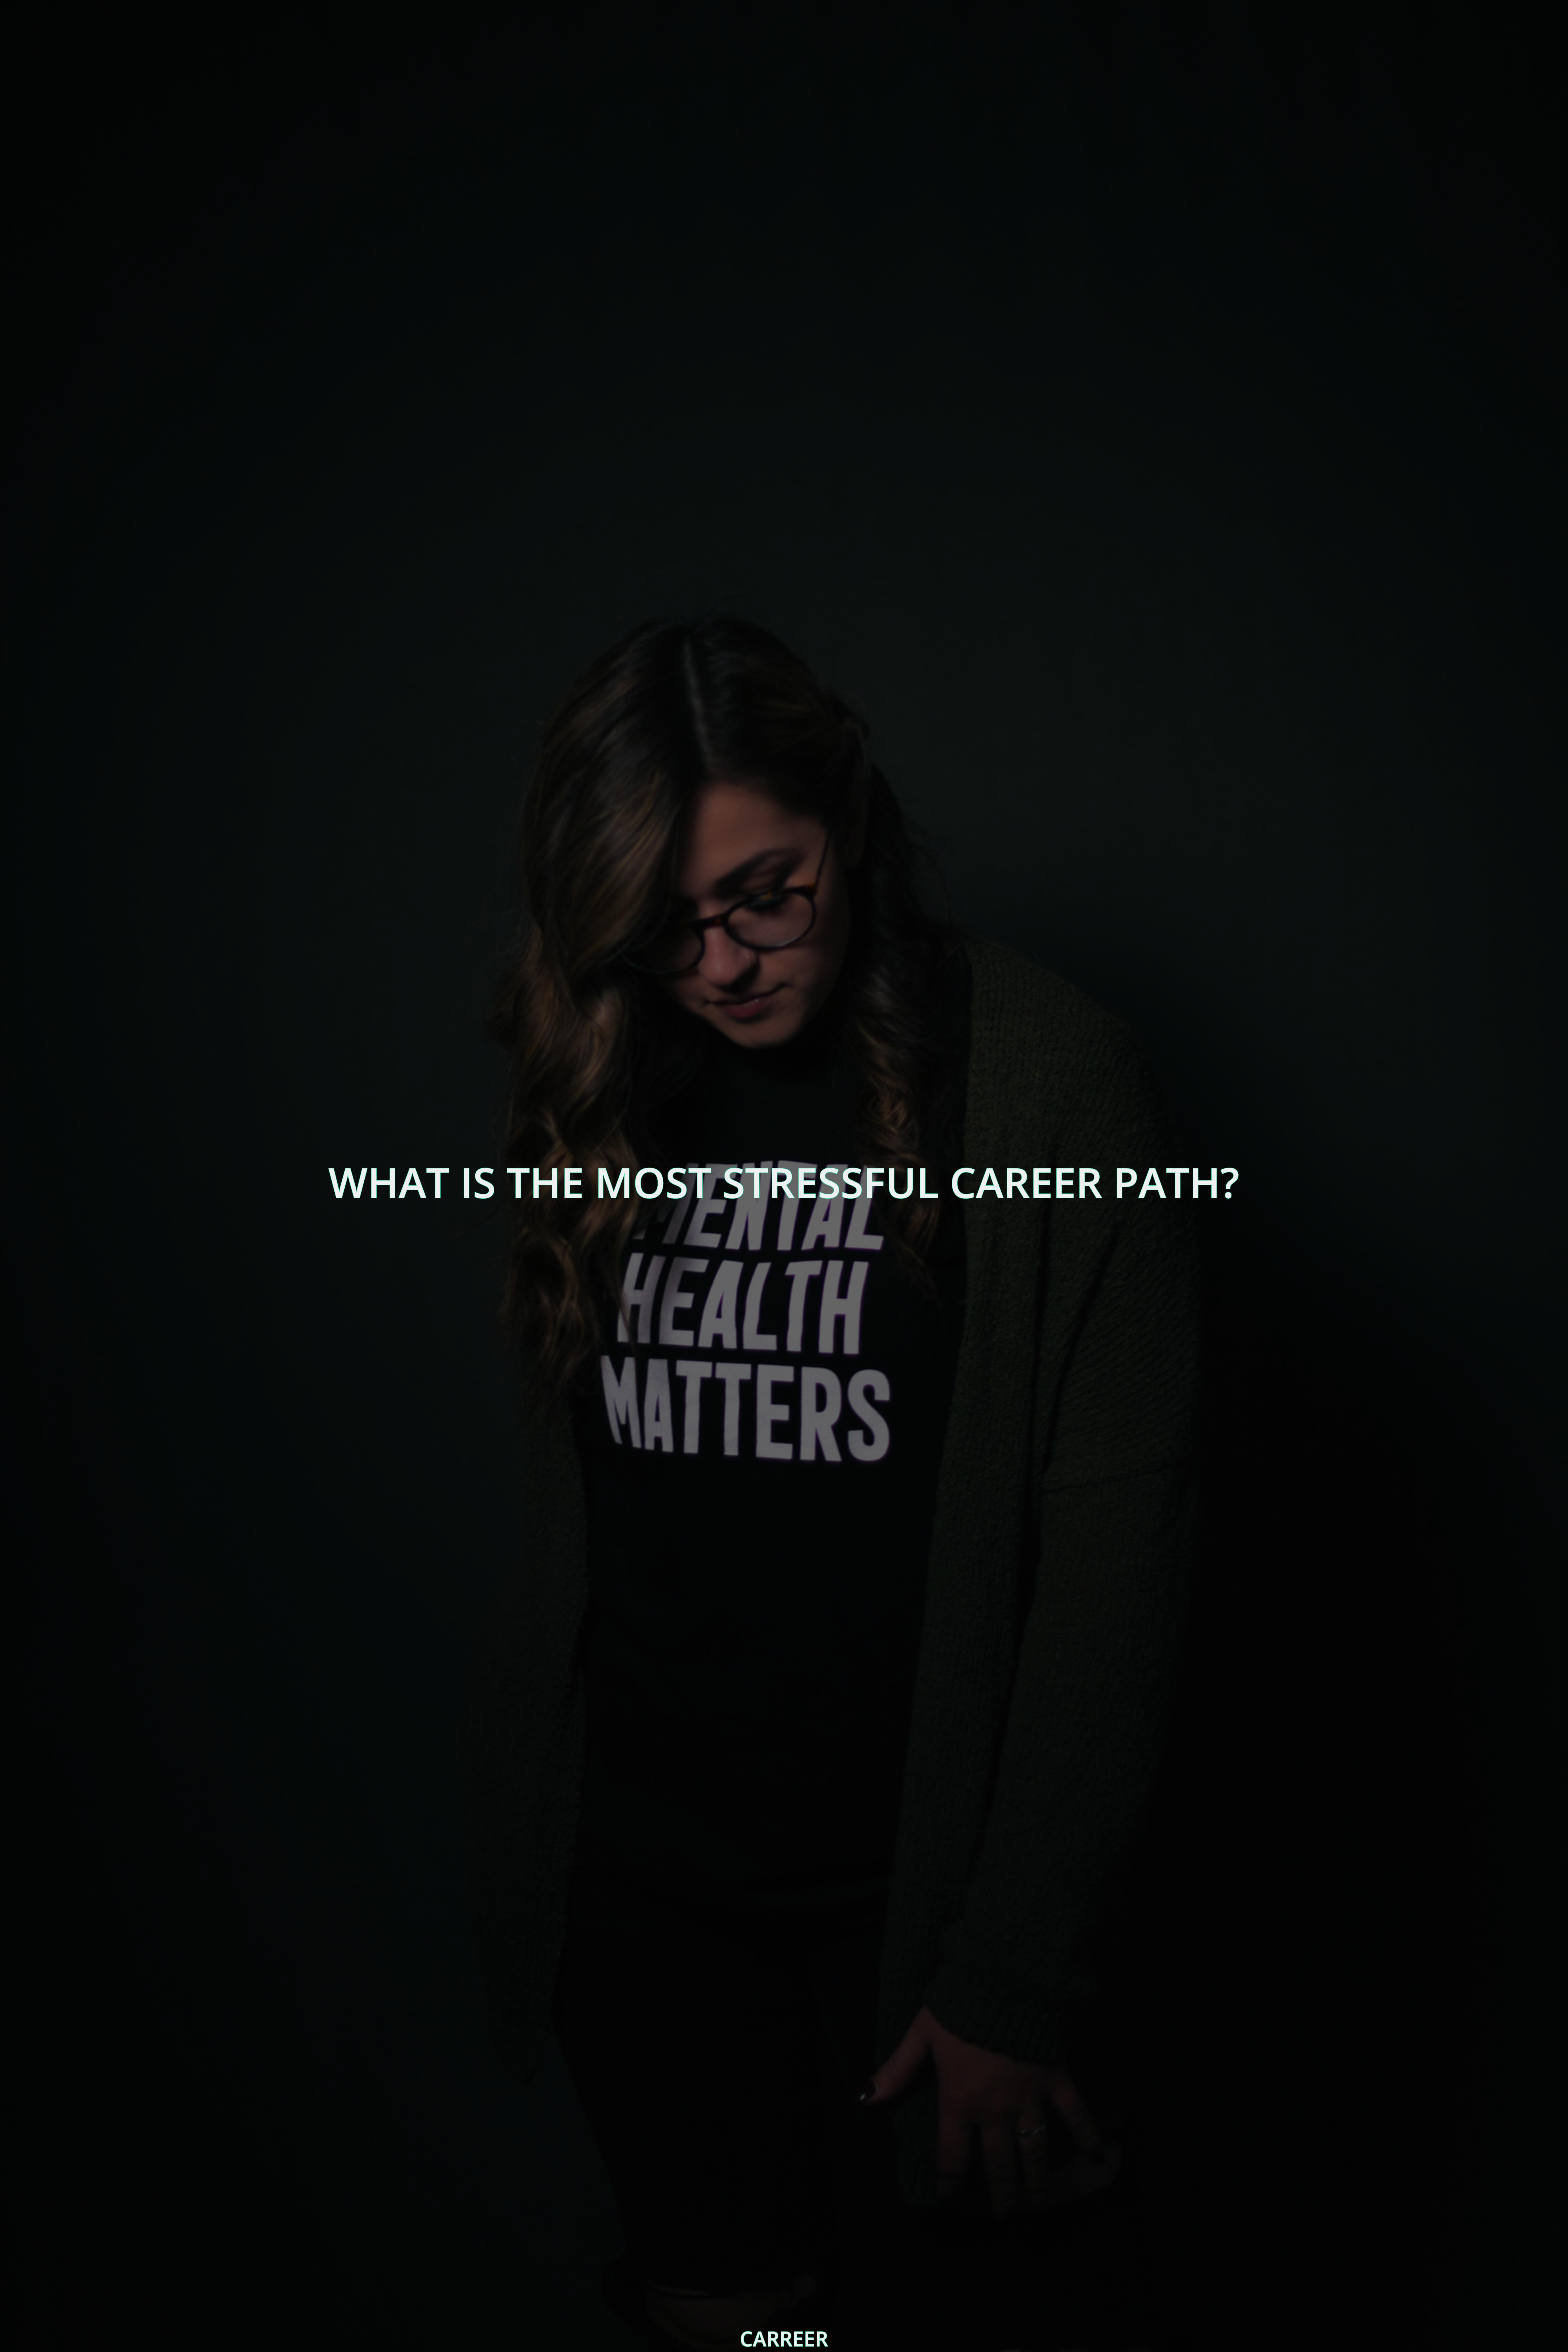 What is the most stressful career path?